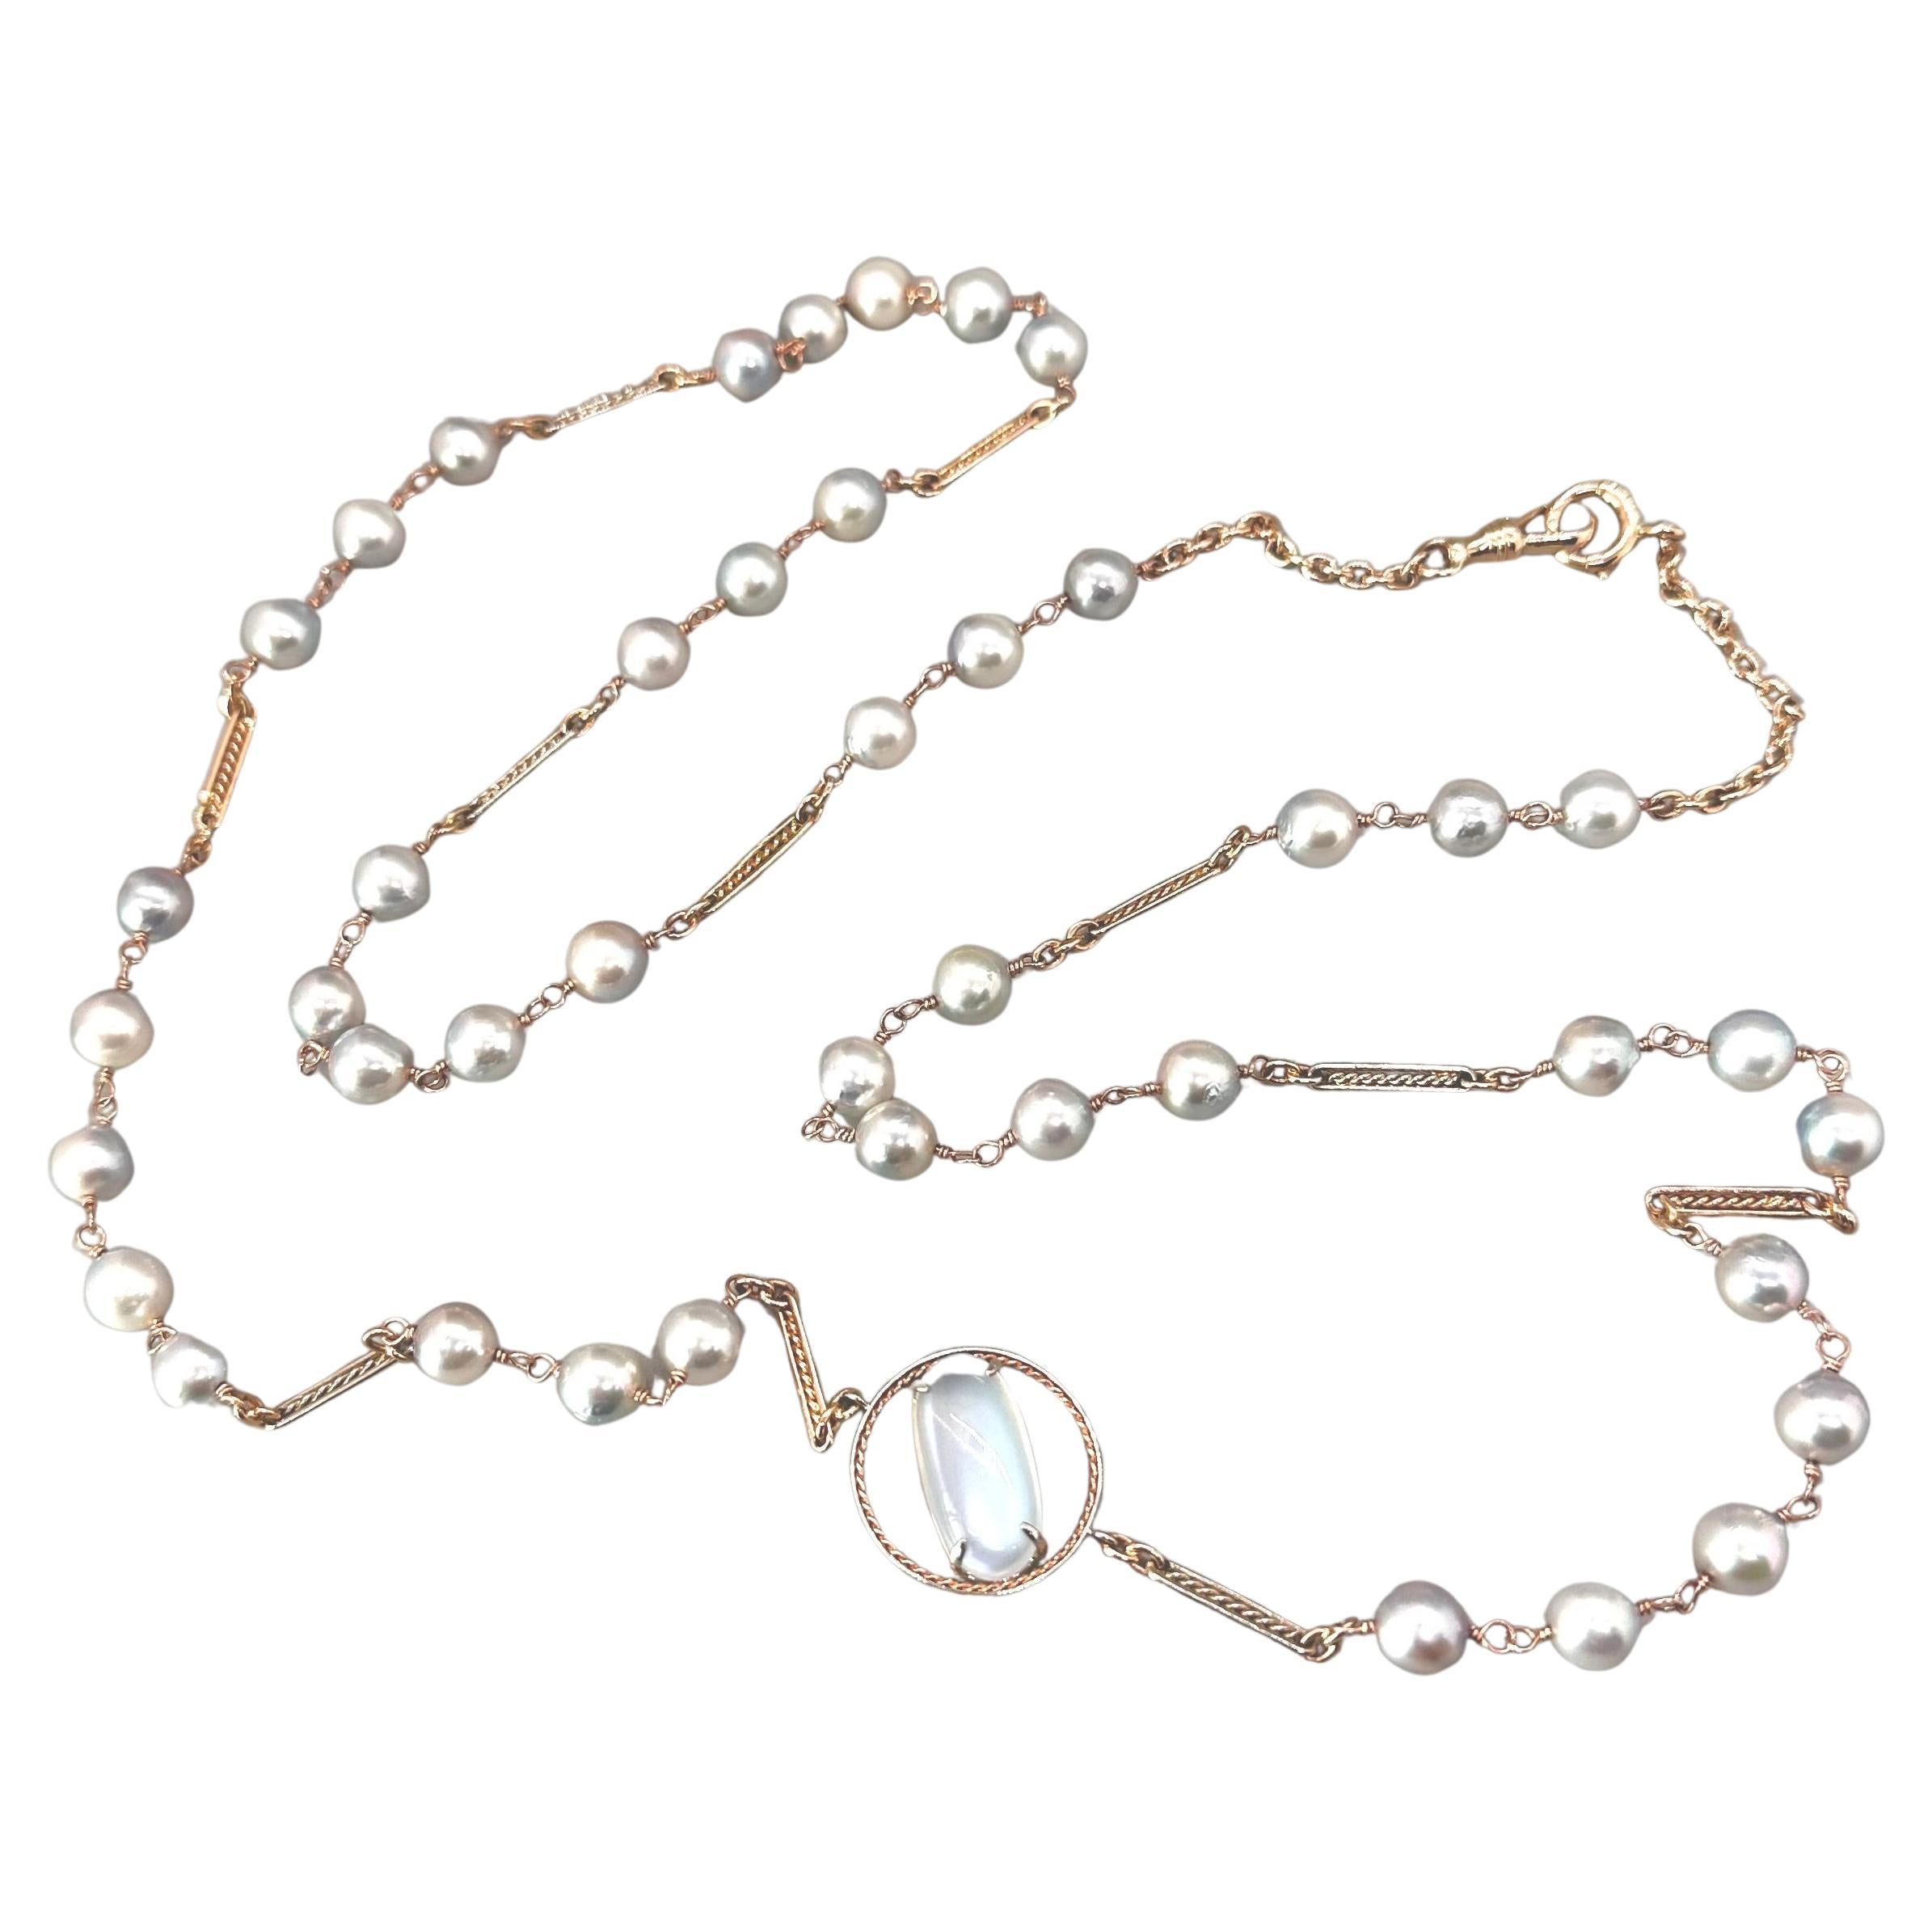 6.61 carat blue moonstone, Akoya pearls on a handmade 14k necklace by G&G Studio For Sale